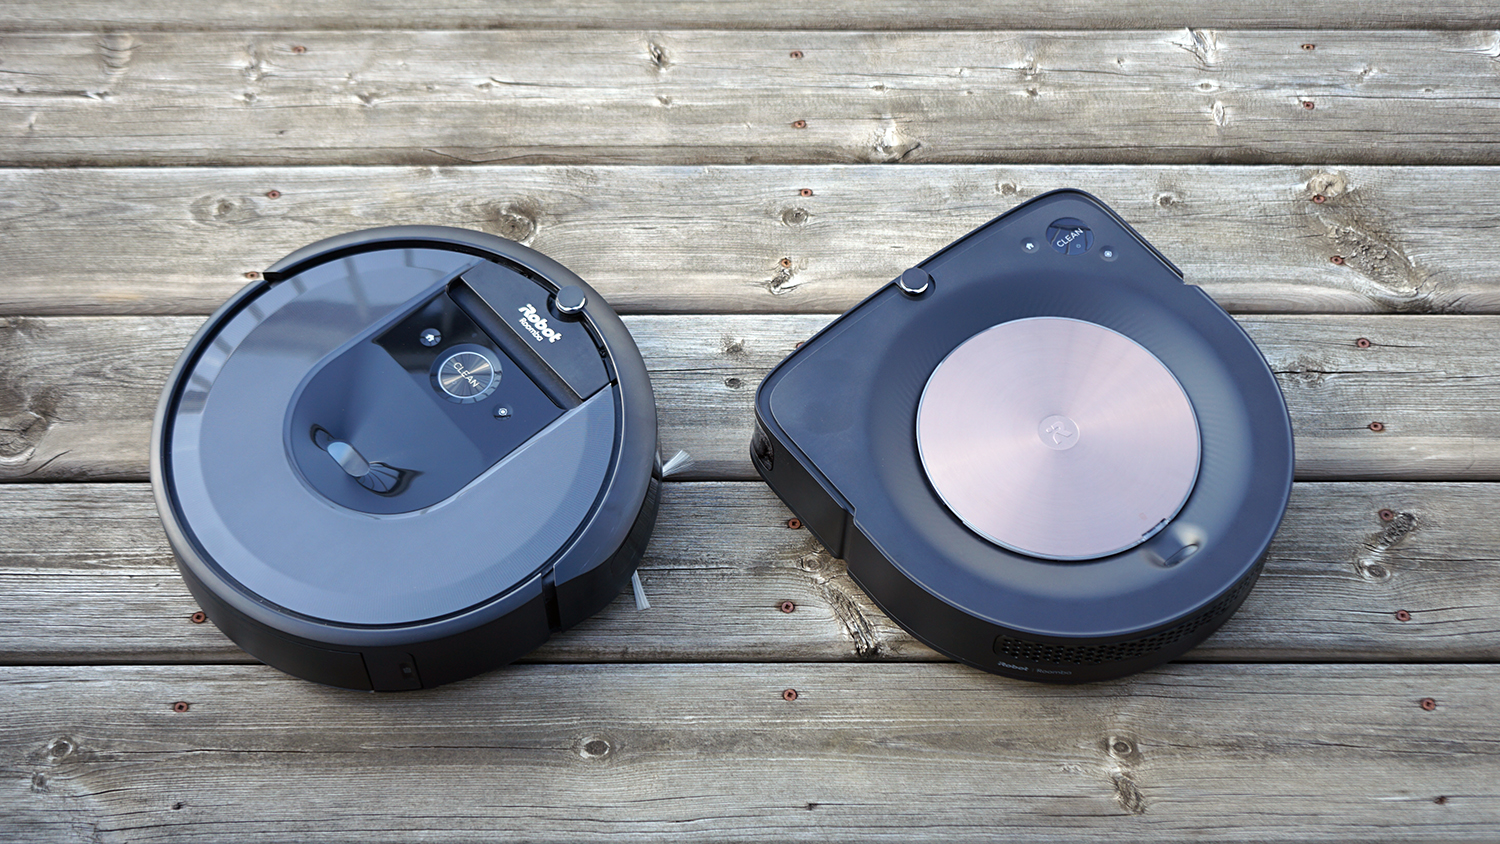  The 6 best robot vacuums for carpet